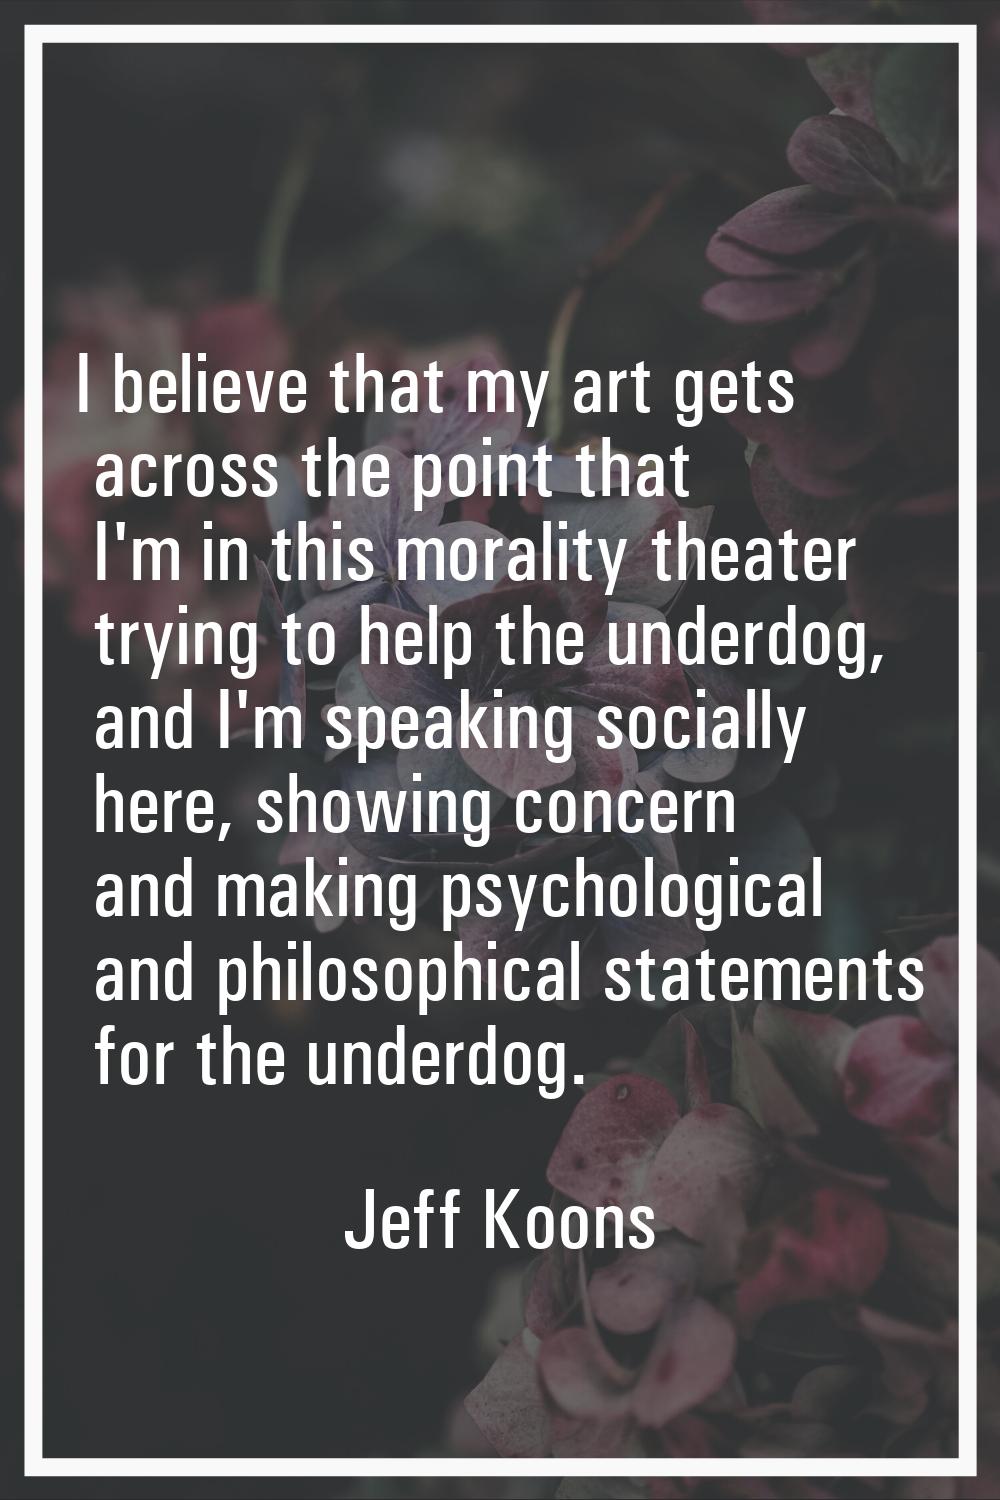 I believe that my art gets across the point that I'm in this morality theater trying to help the un